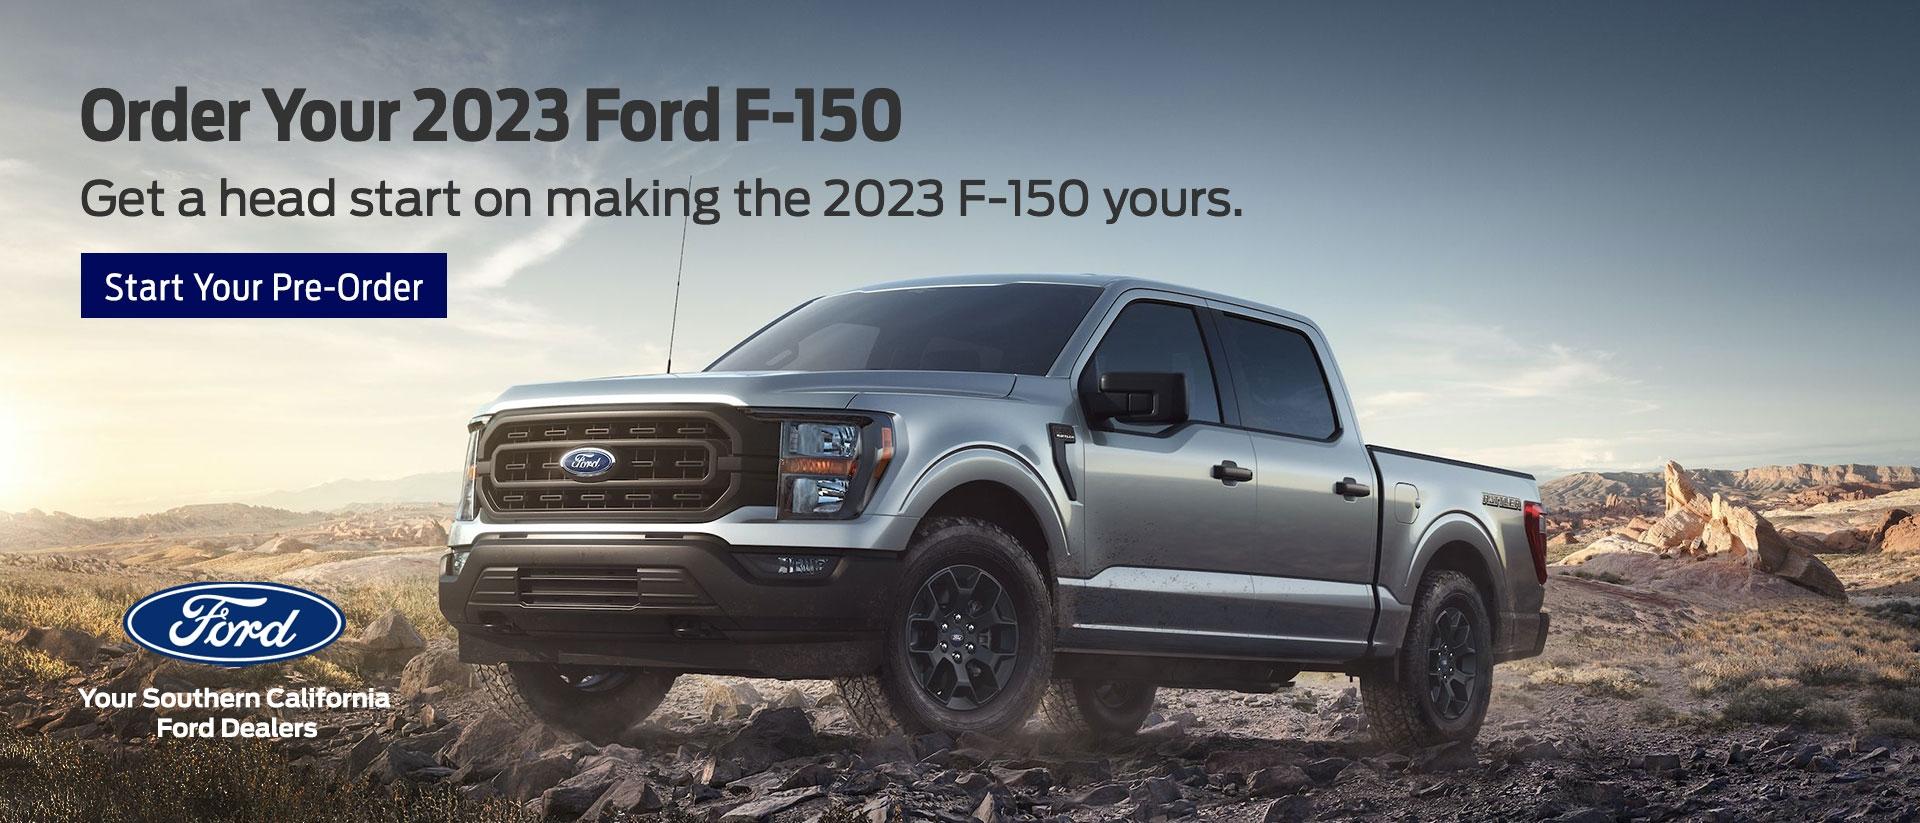 Custom Order Your New 2023 Ford F-150 from Your Local Southern California Ford Dealers